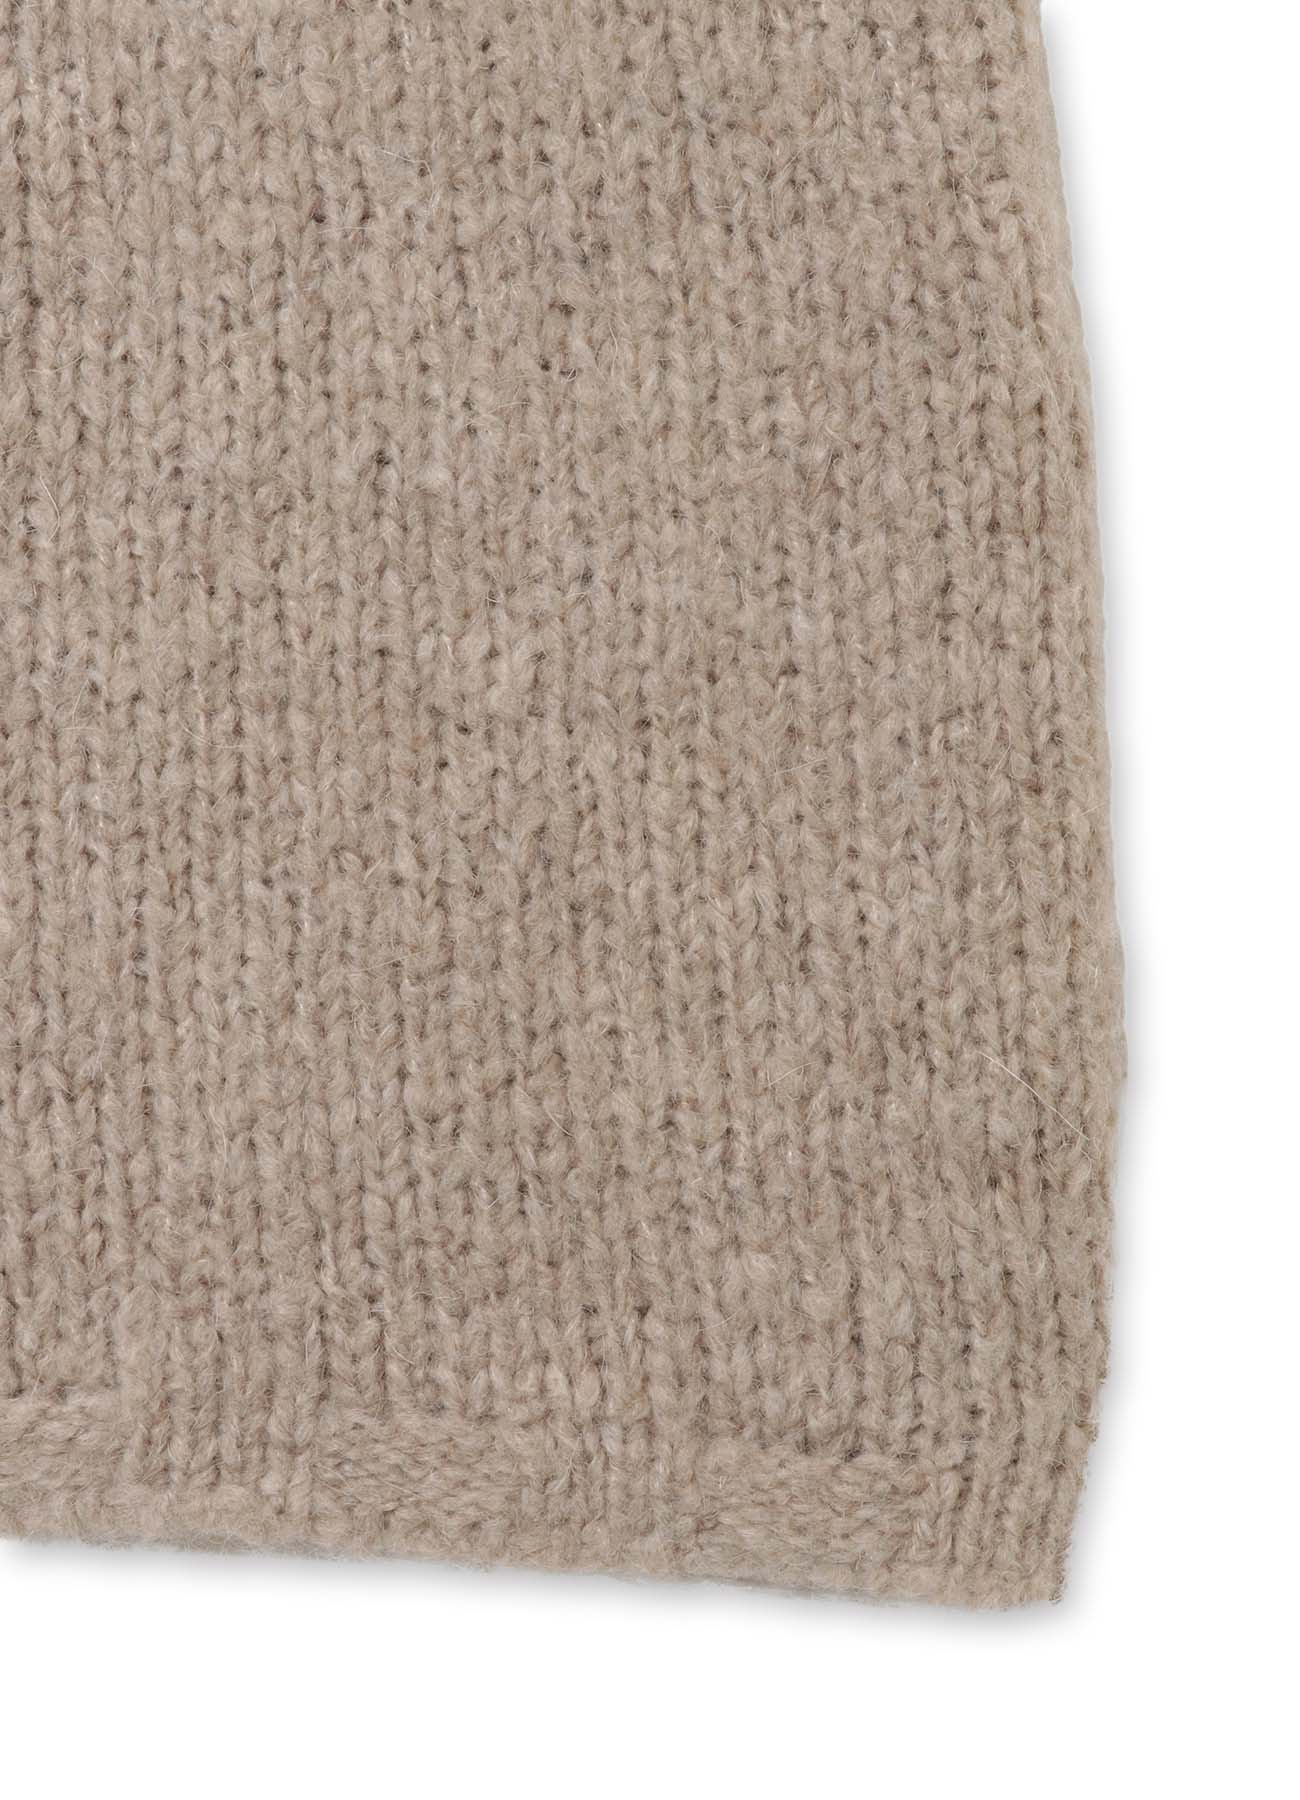 Airy mohair Collar knit